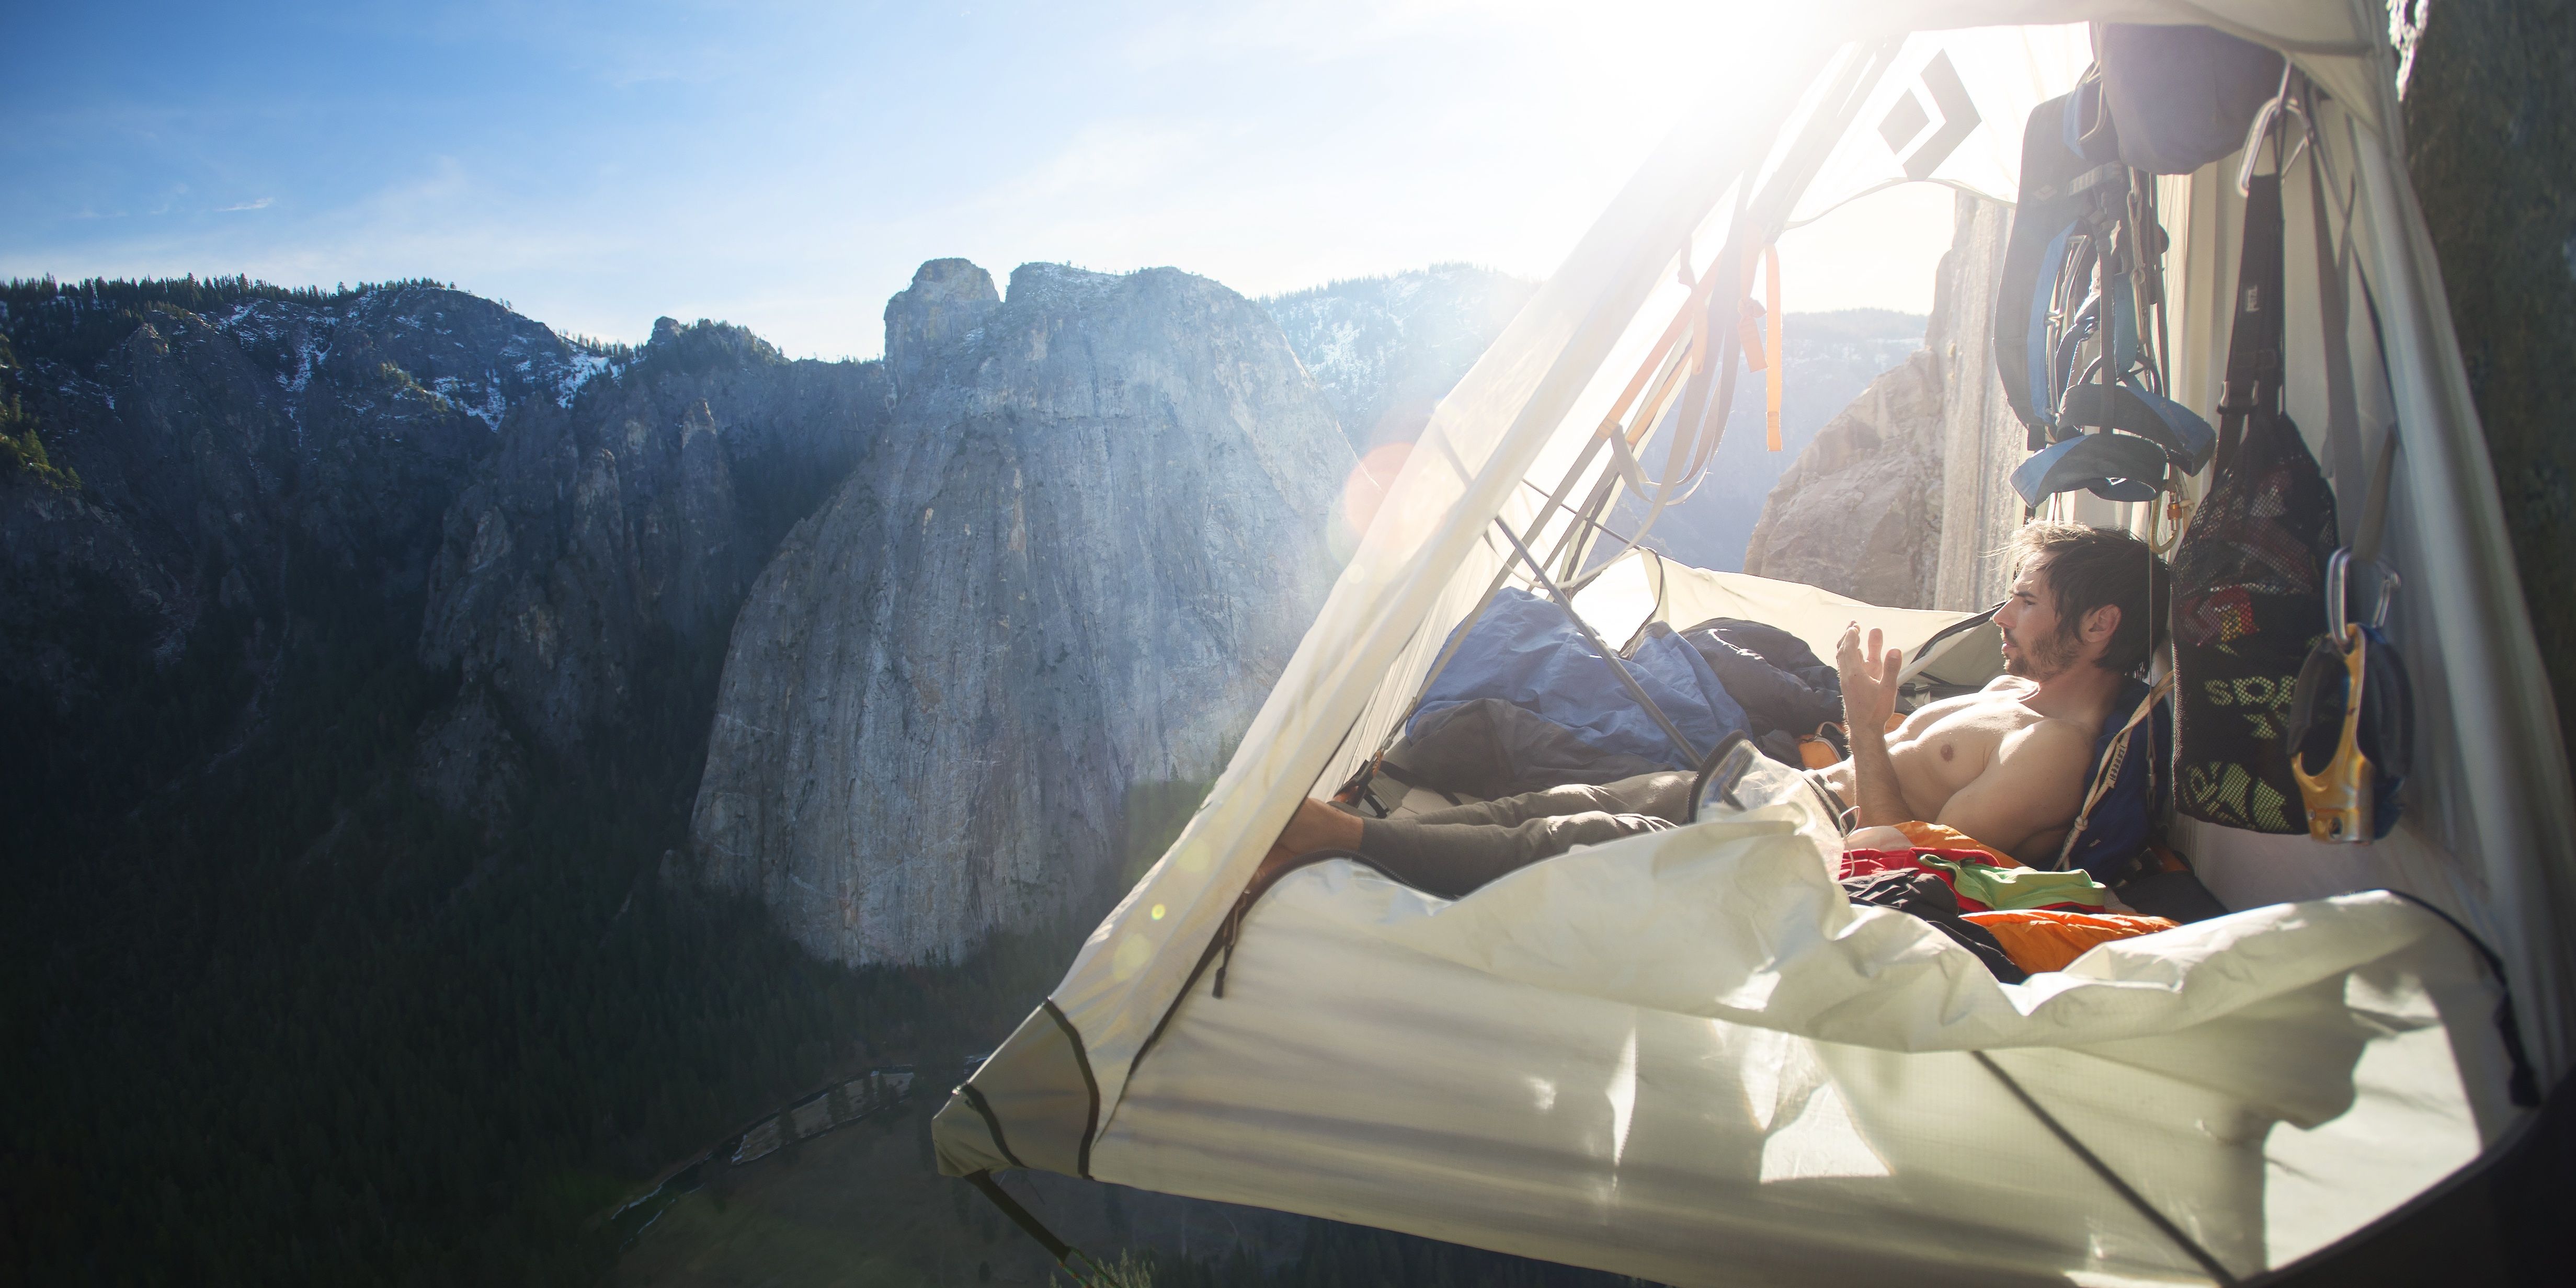 Tommy Caldwell camping on the side of a mountain in The Dawn Wall